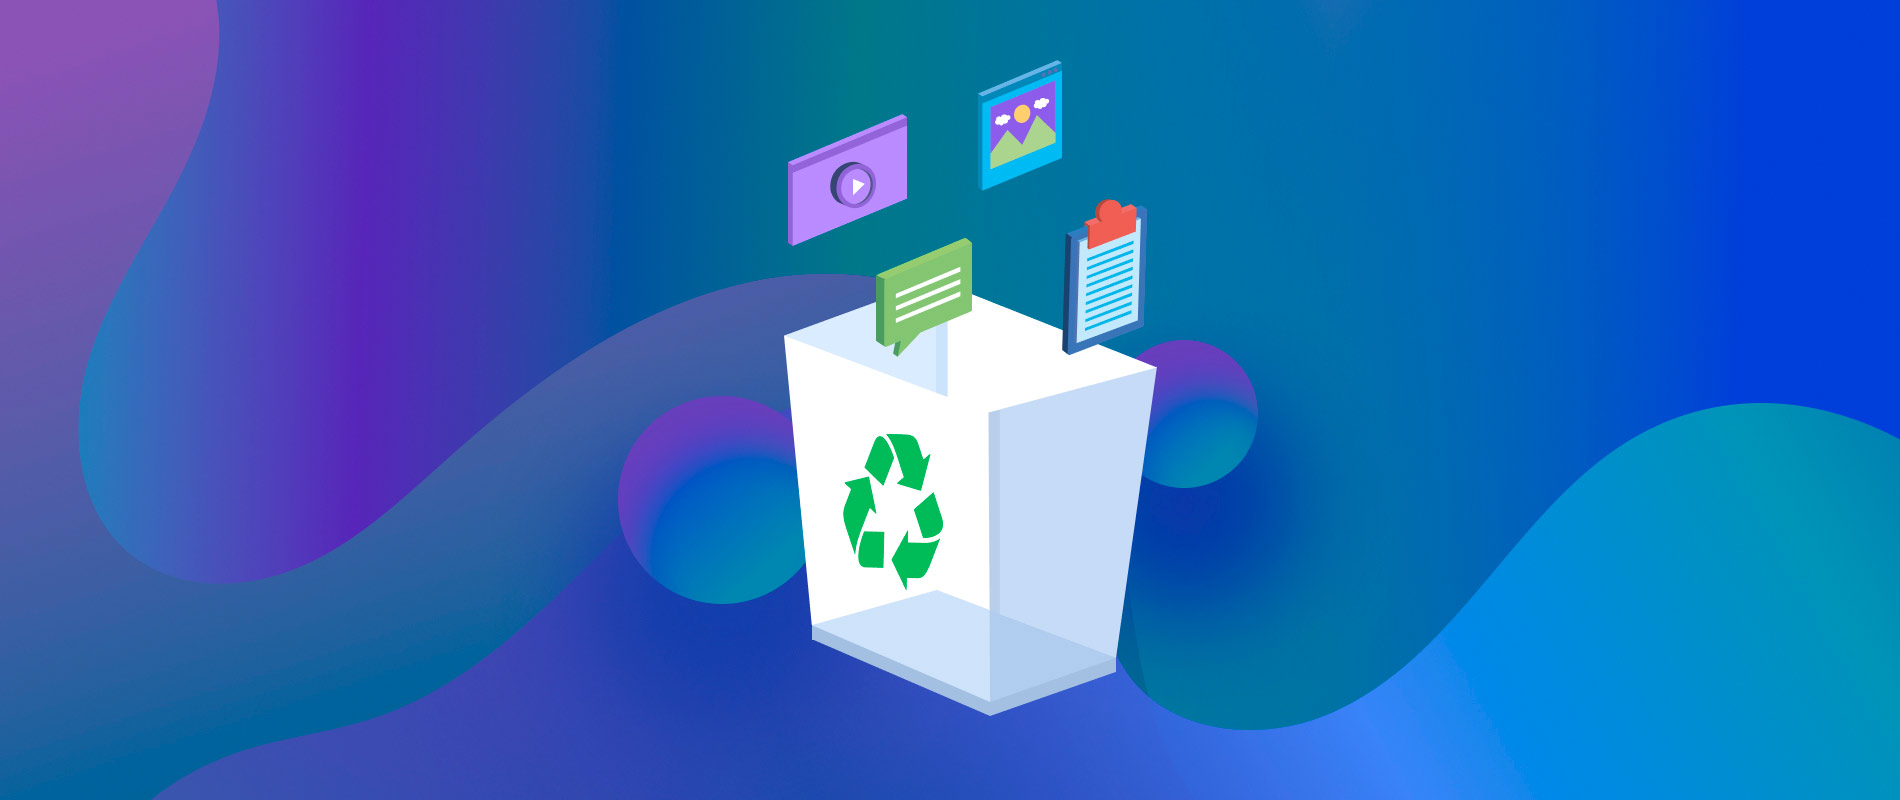 How To Recover Files Deleted From Recycle Bin For Free (2022)